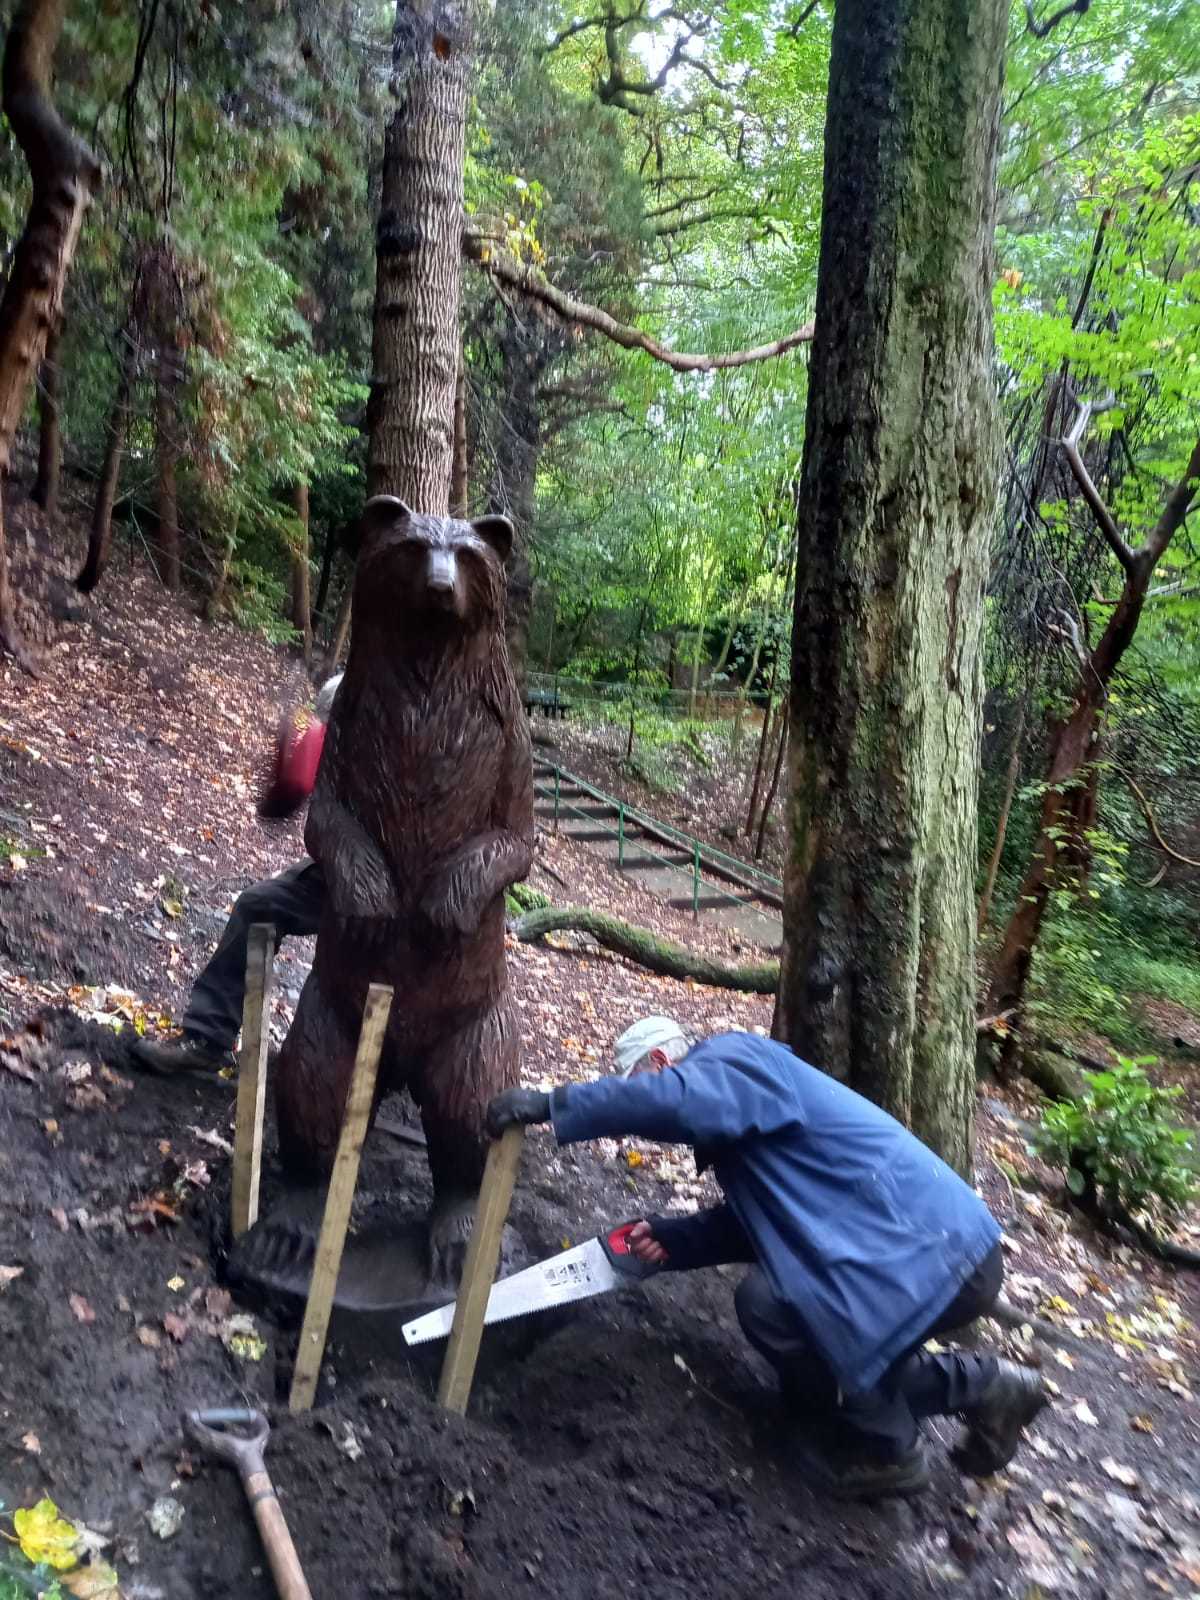 The wooden bear carving, weighing in at around half a tonne, being repaired